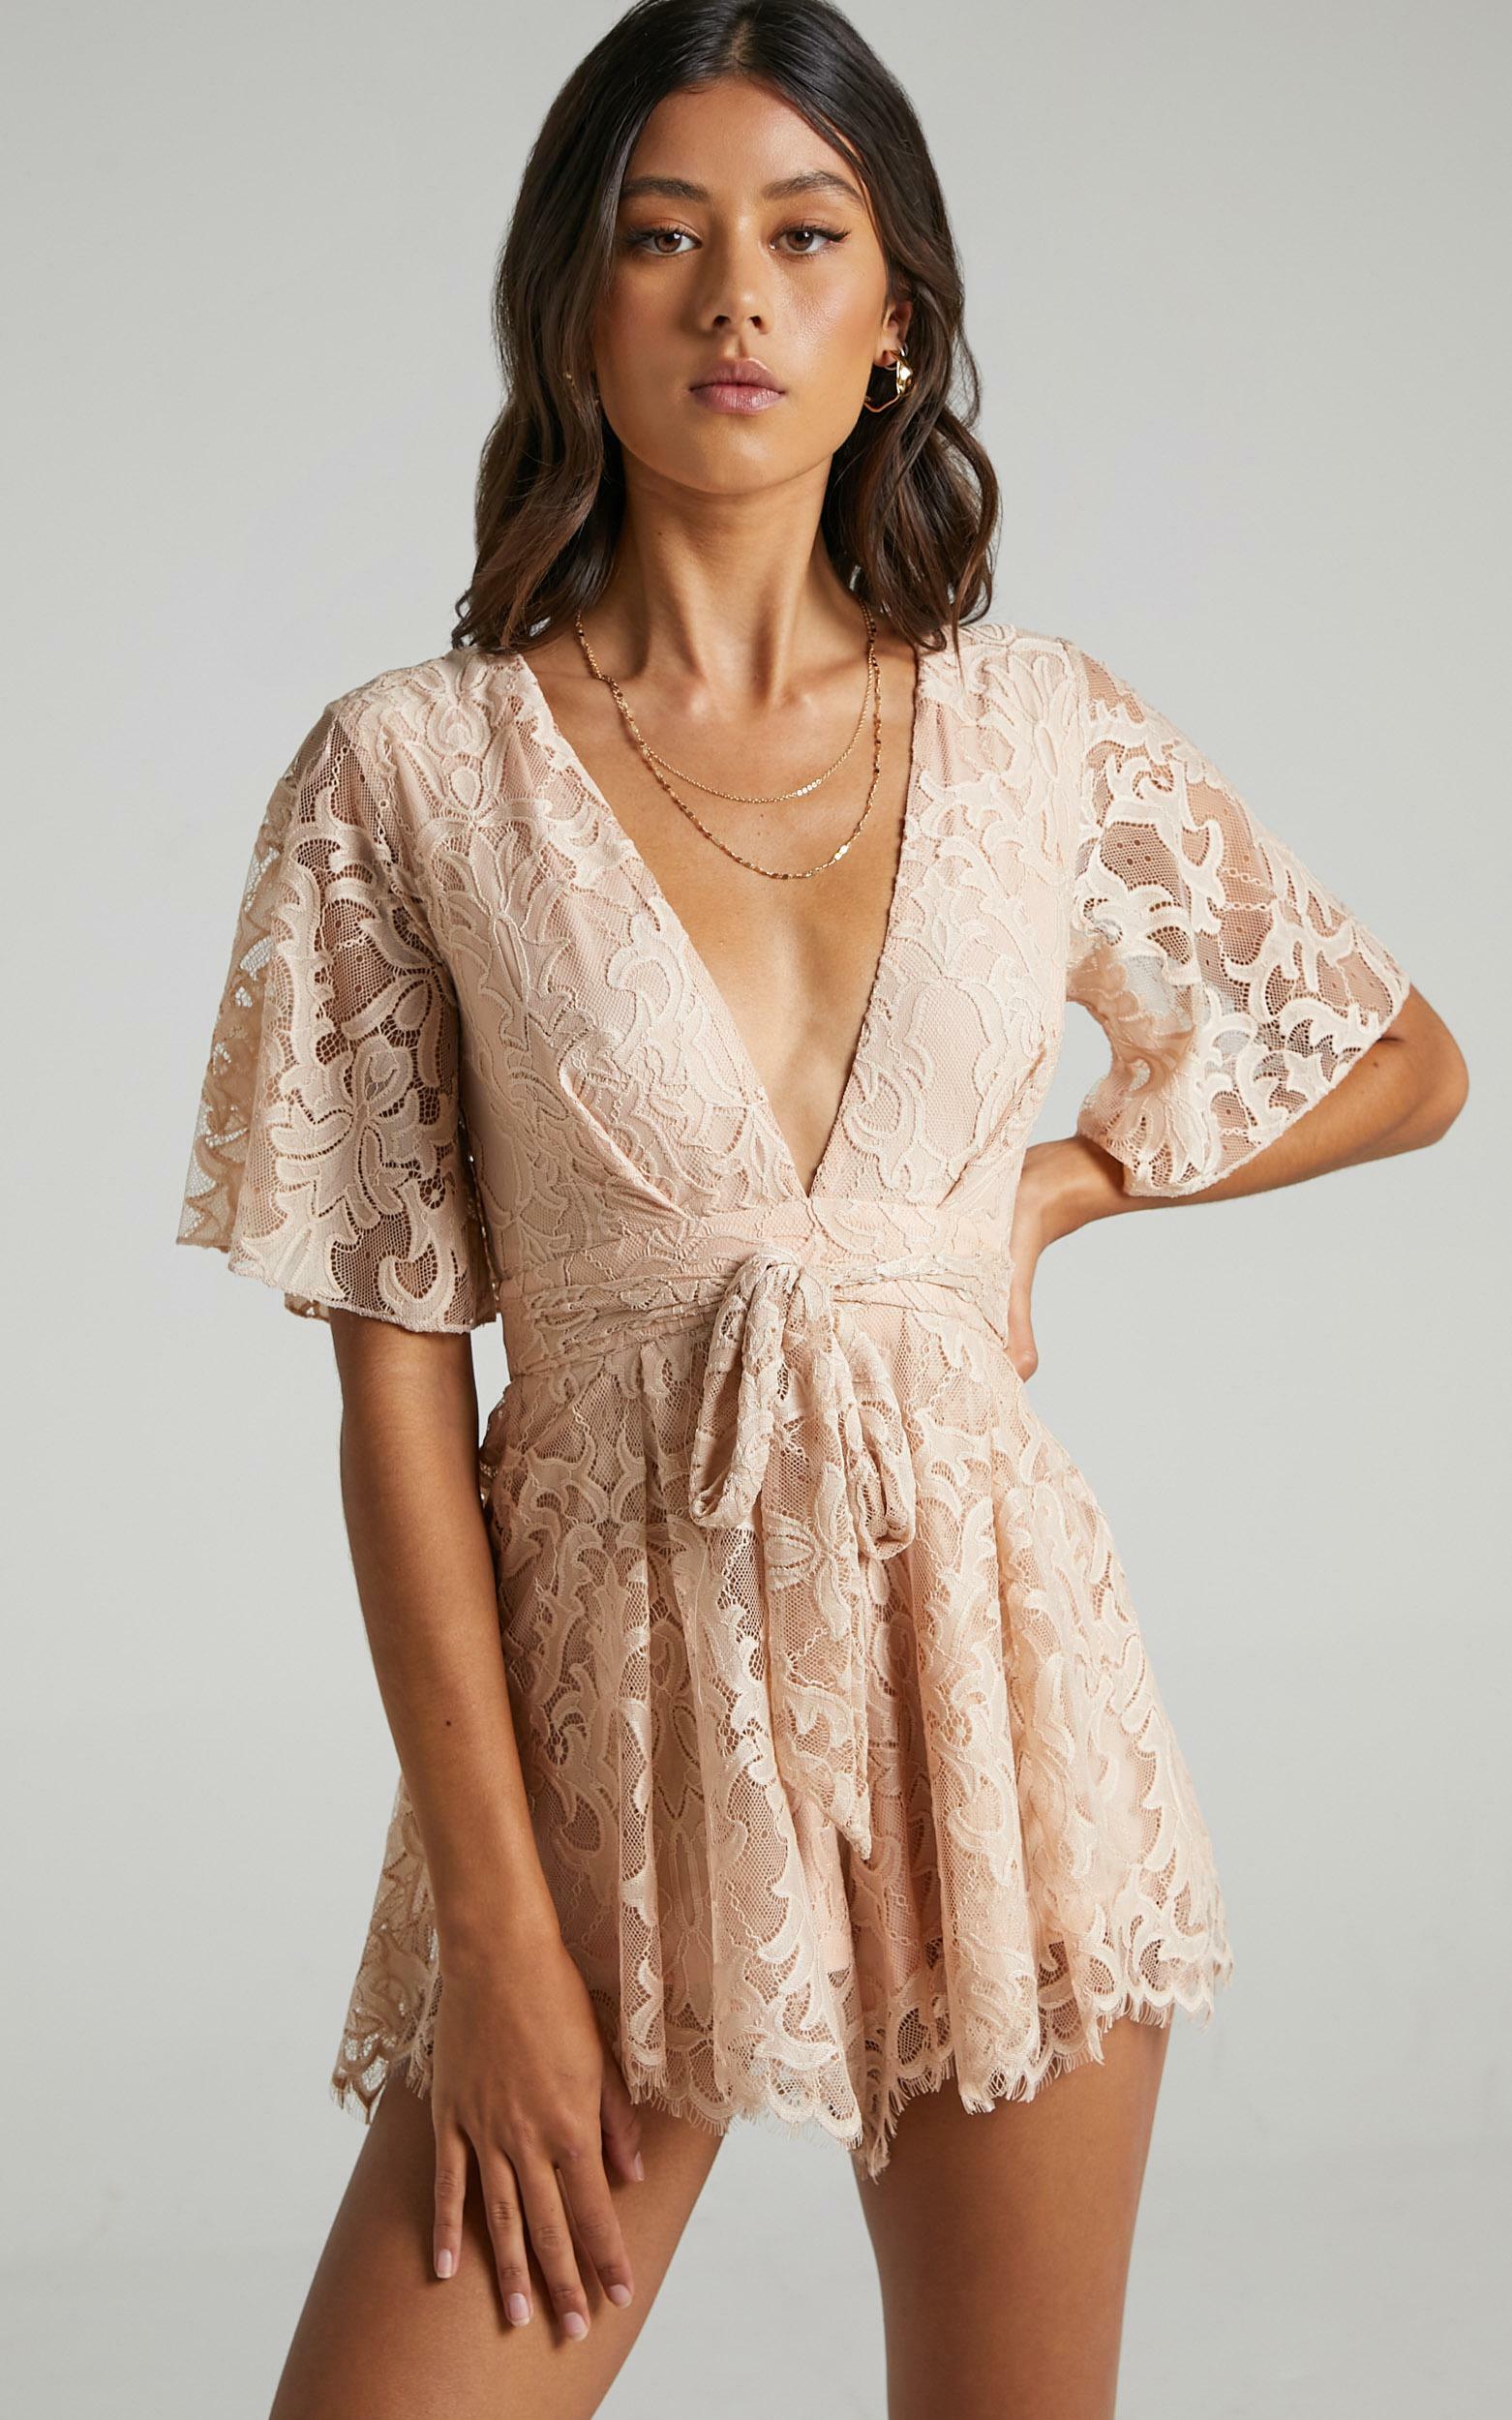 Break the Bar playsuit in Blush Lace - 04, PNK3, hi-res image number null